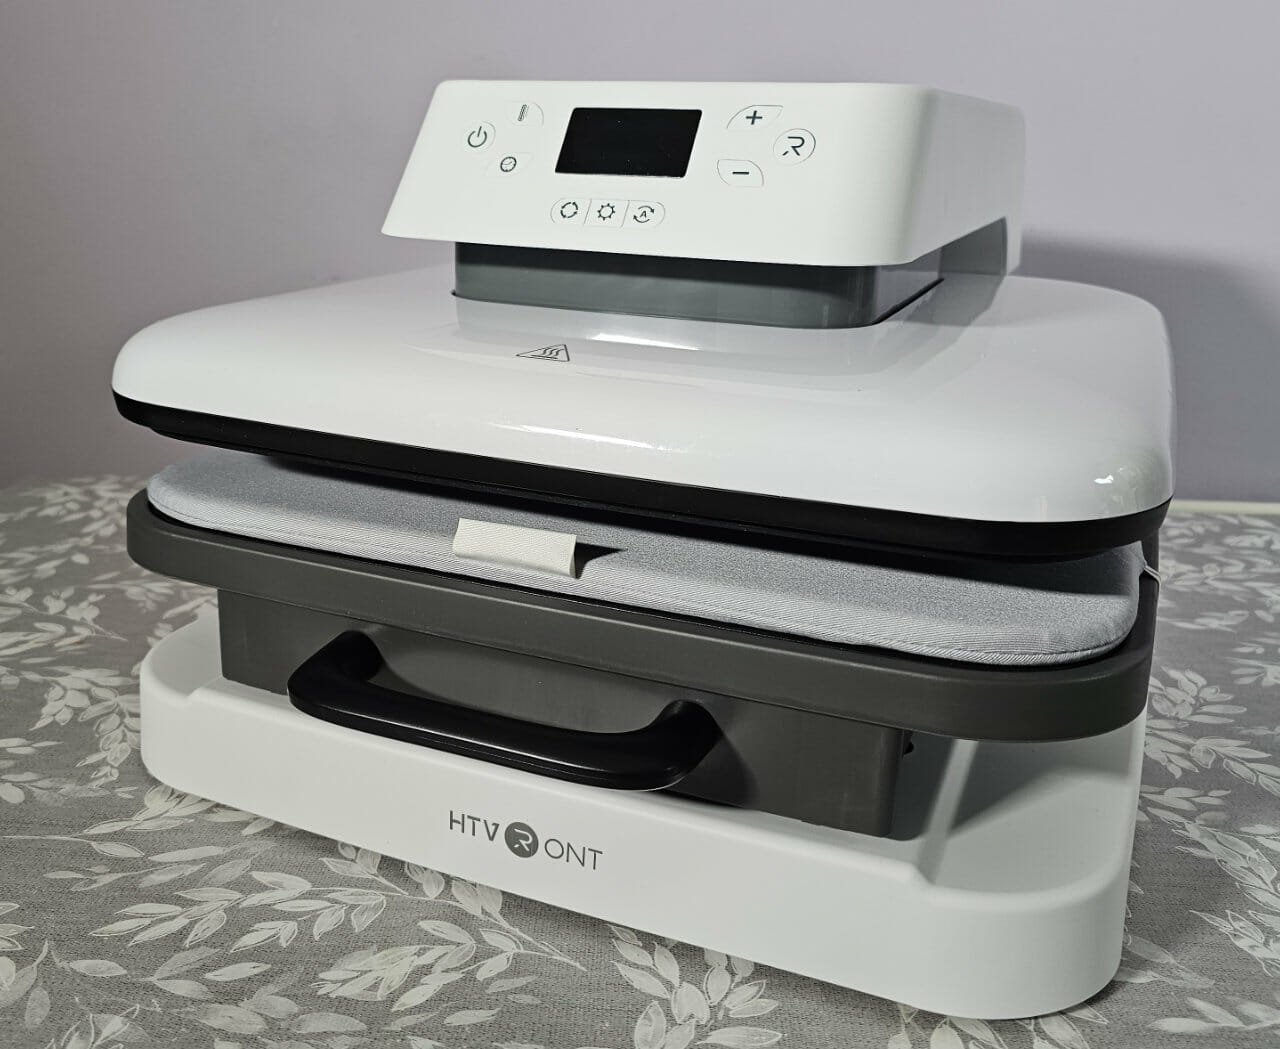 HTVRONT launches world's first heat press with auto pressure exertion